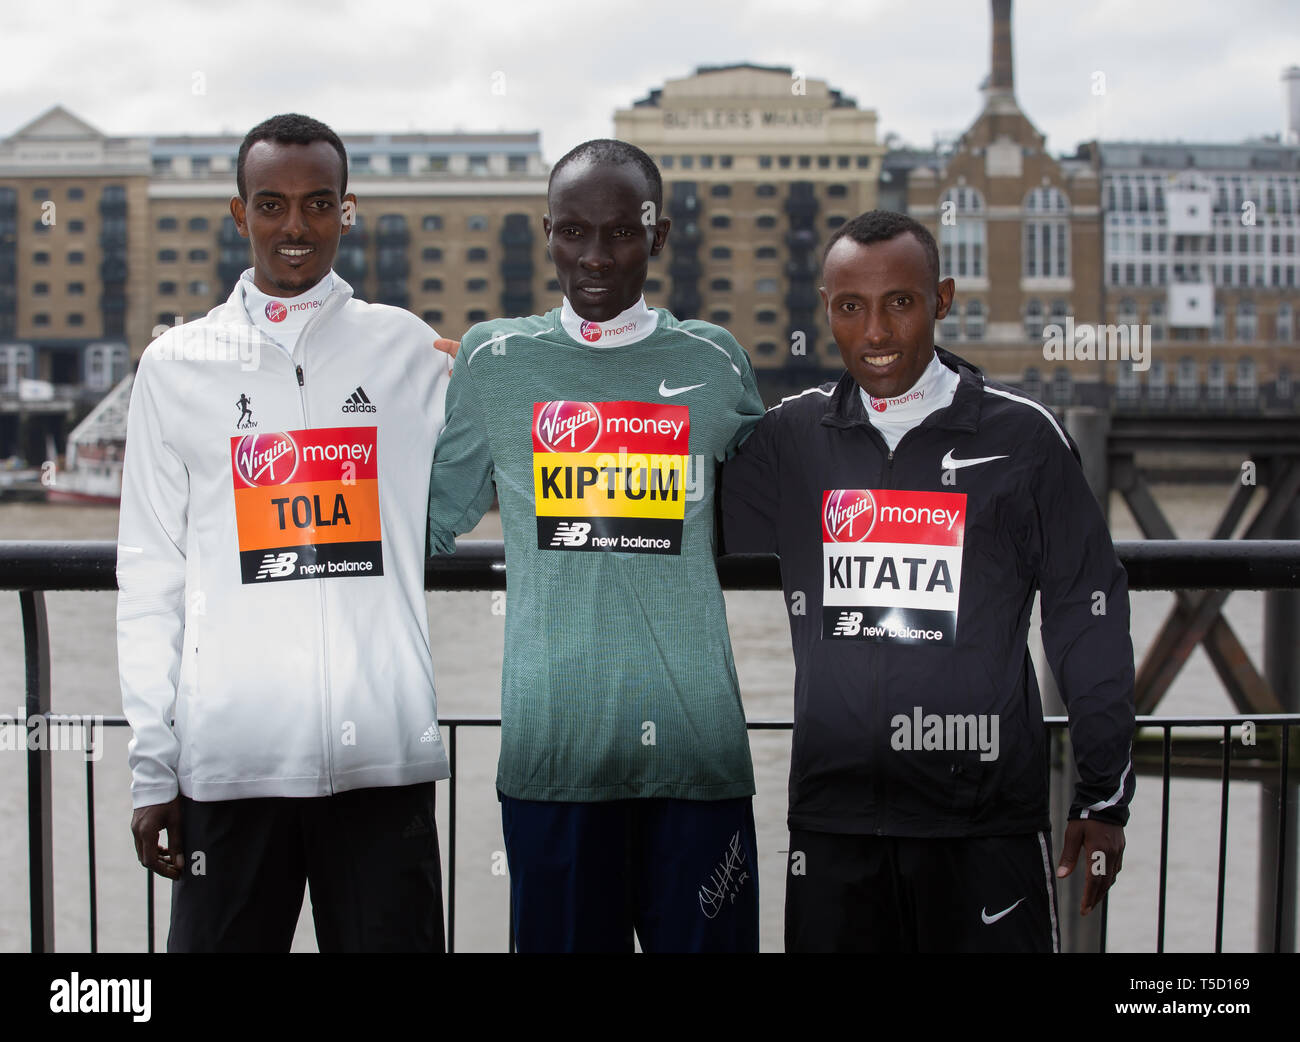 London, UK. 24th Apr, 2019. The London Marathon Elite Mens Photocall takes place outside the Tower Hotel with Tower Bridge in the background ahead of the Marathon on Sunday. Taking part are: Sir Mo Farah(GB), Eliud Kipchoge(Ken), Abraham Kiptum(Ken), Shura Kitata(ETH) and Tamirat Tola(ETH). Credit: Keith Larby/Alamy Live News Stock Photo